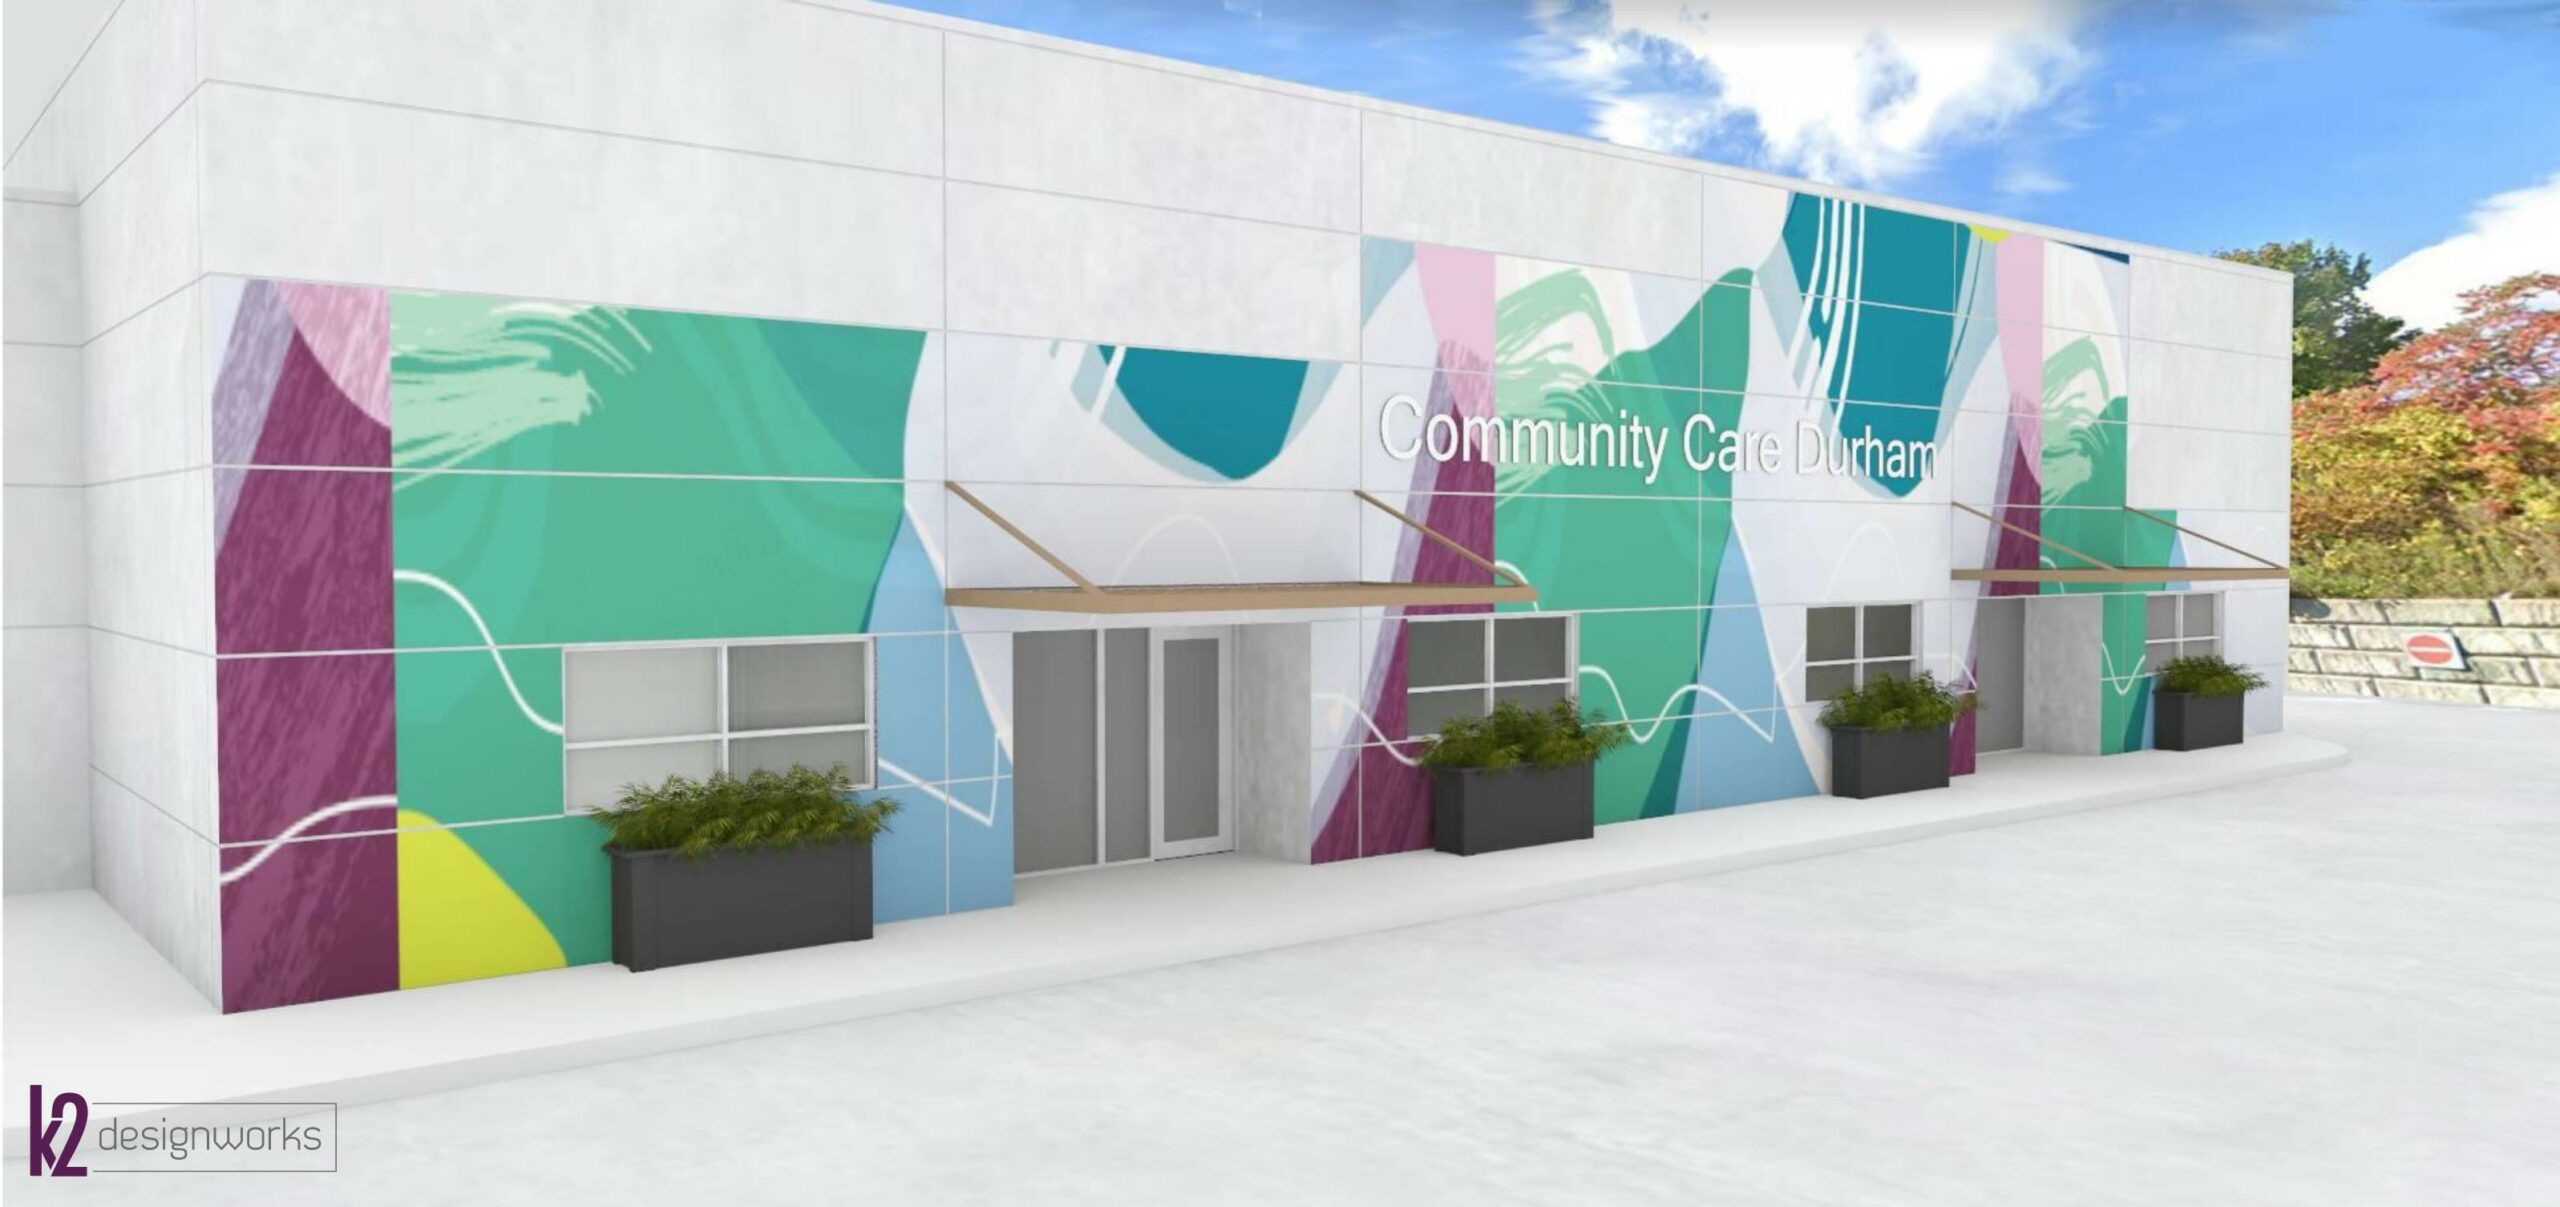 Exterior rendering of the updated Health and Wellness Community Hub entrance. Rendering done by k2 designworks.